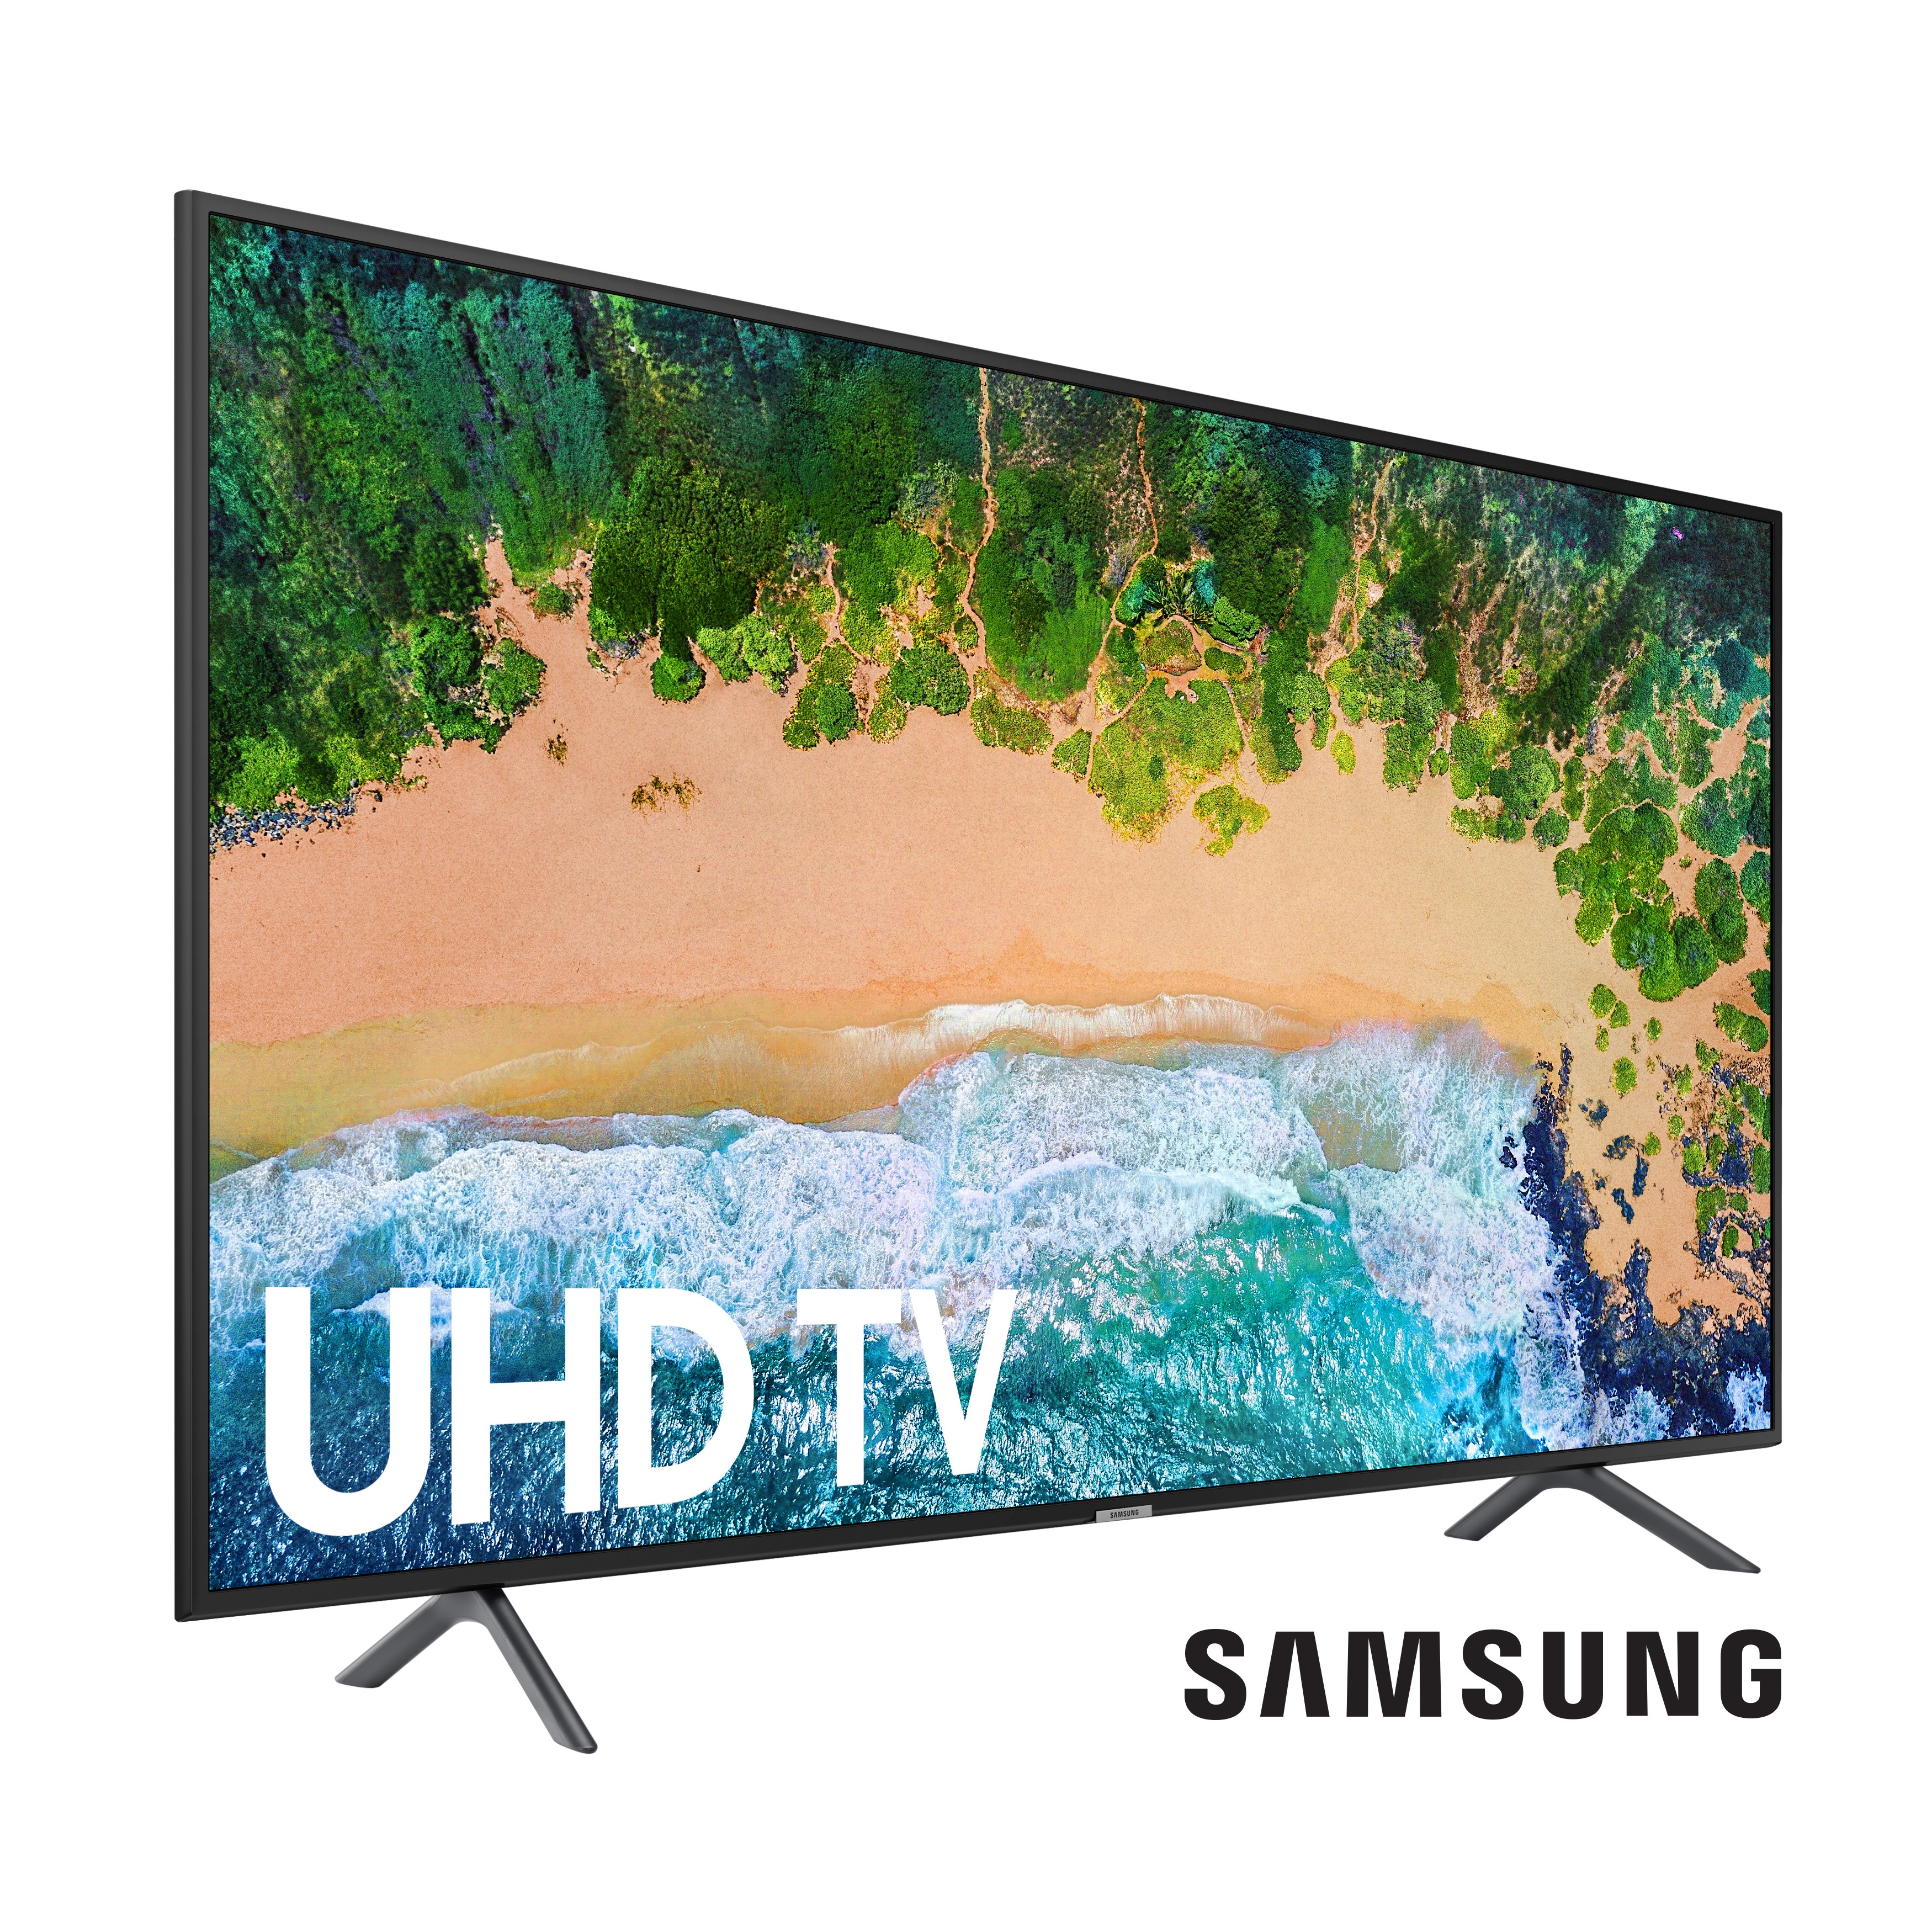 SAMSUNG 75" Class 4K UHD 2160p LED Smart TV with HDR UN75NU6900 - image 3 of 22